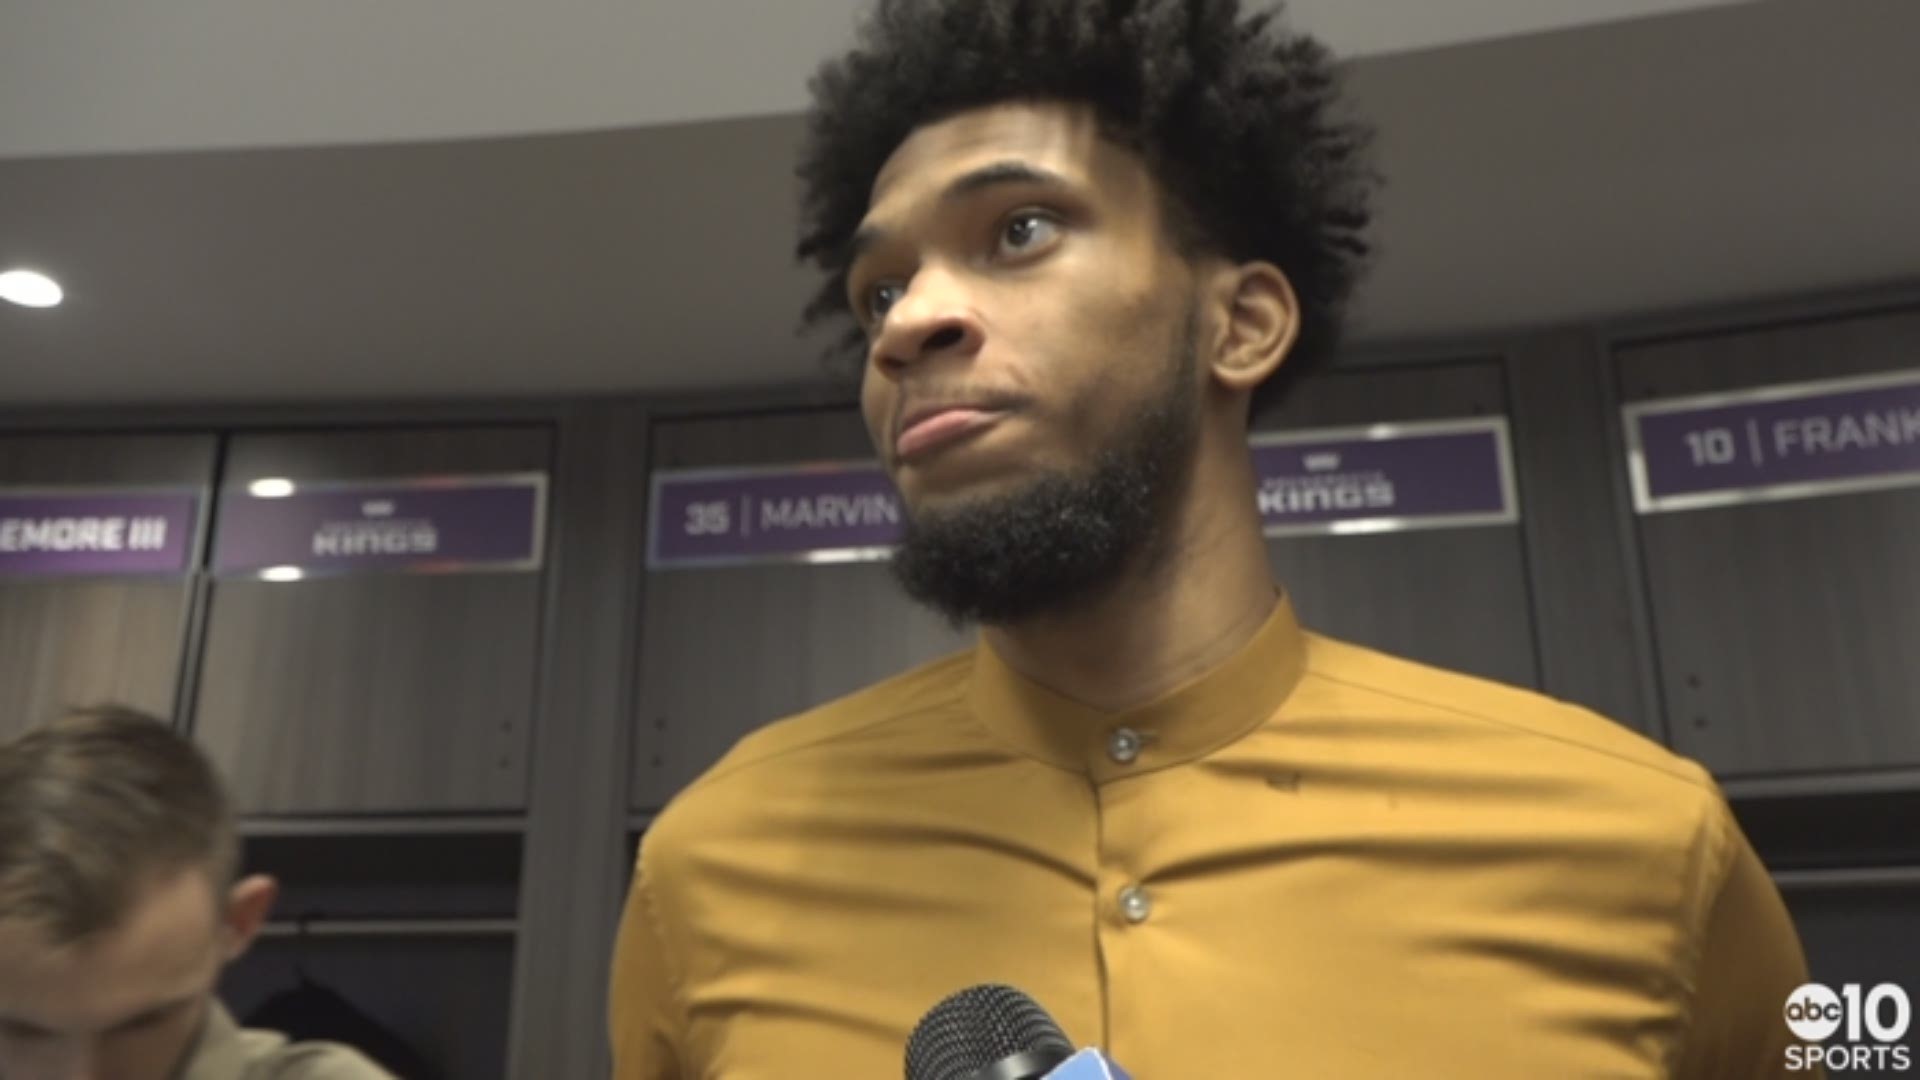 Kings rookie Marvin Bagley III discusses Wednesday's home win over the Minnesota Timberwolves, going 9-of-10 from the free throw line and scoring 140 points in a regulation game.